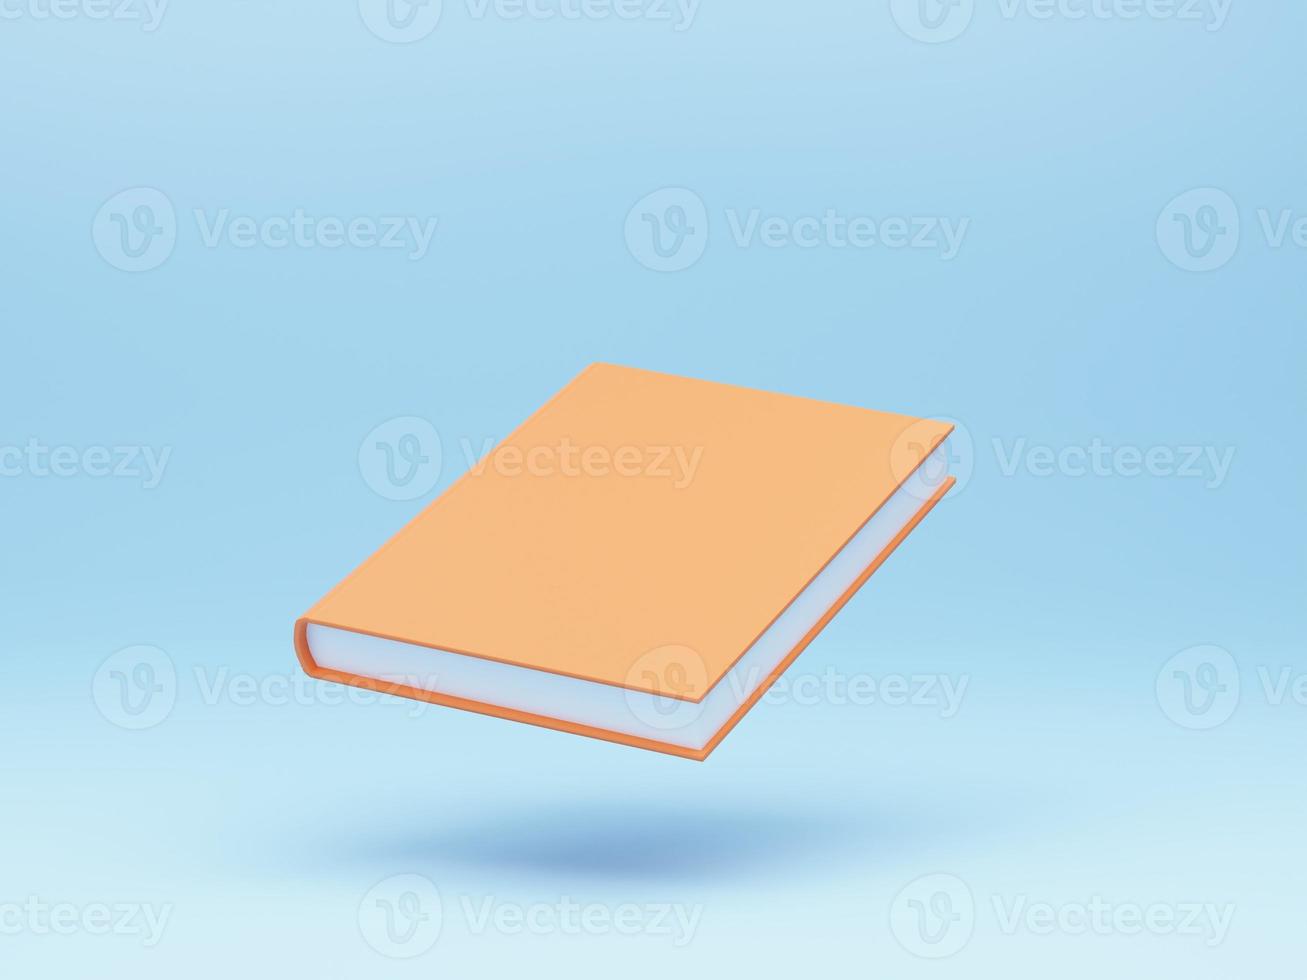 Textbook icon with cartoon style isolated on blue background. 3d renders photo